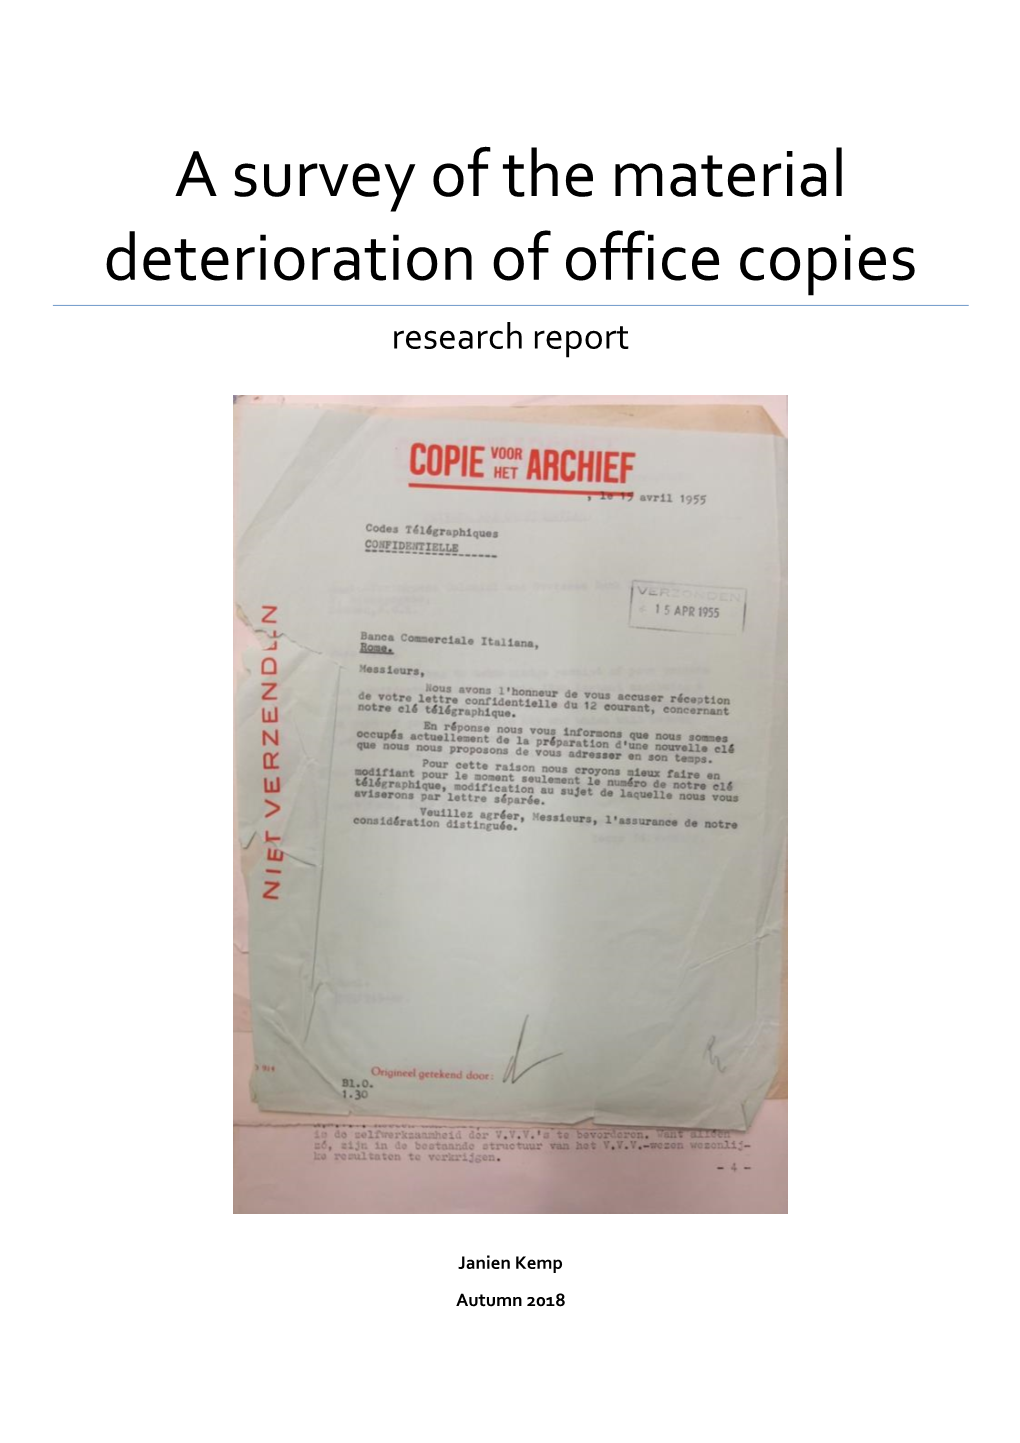 A Survey of the Material Deterioration of Office Copies Research Report